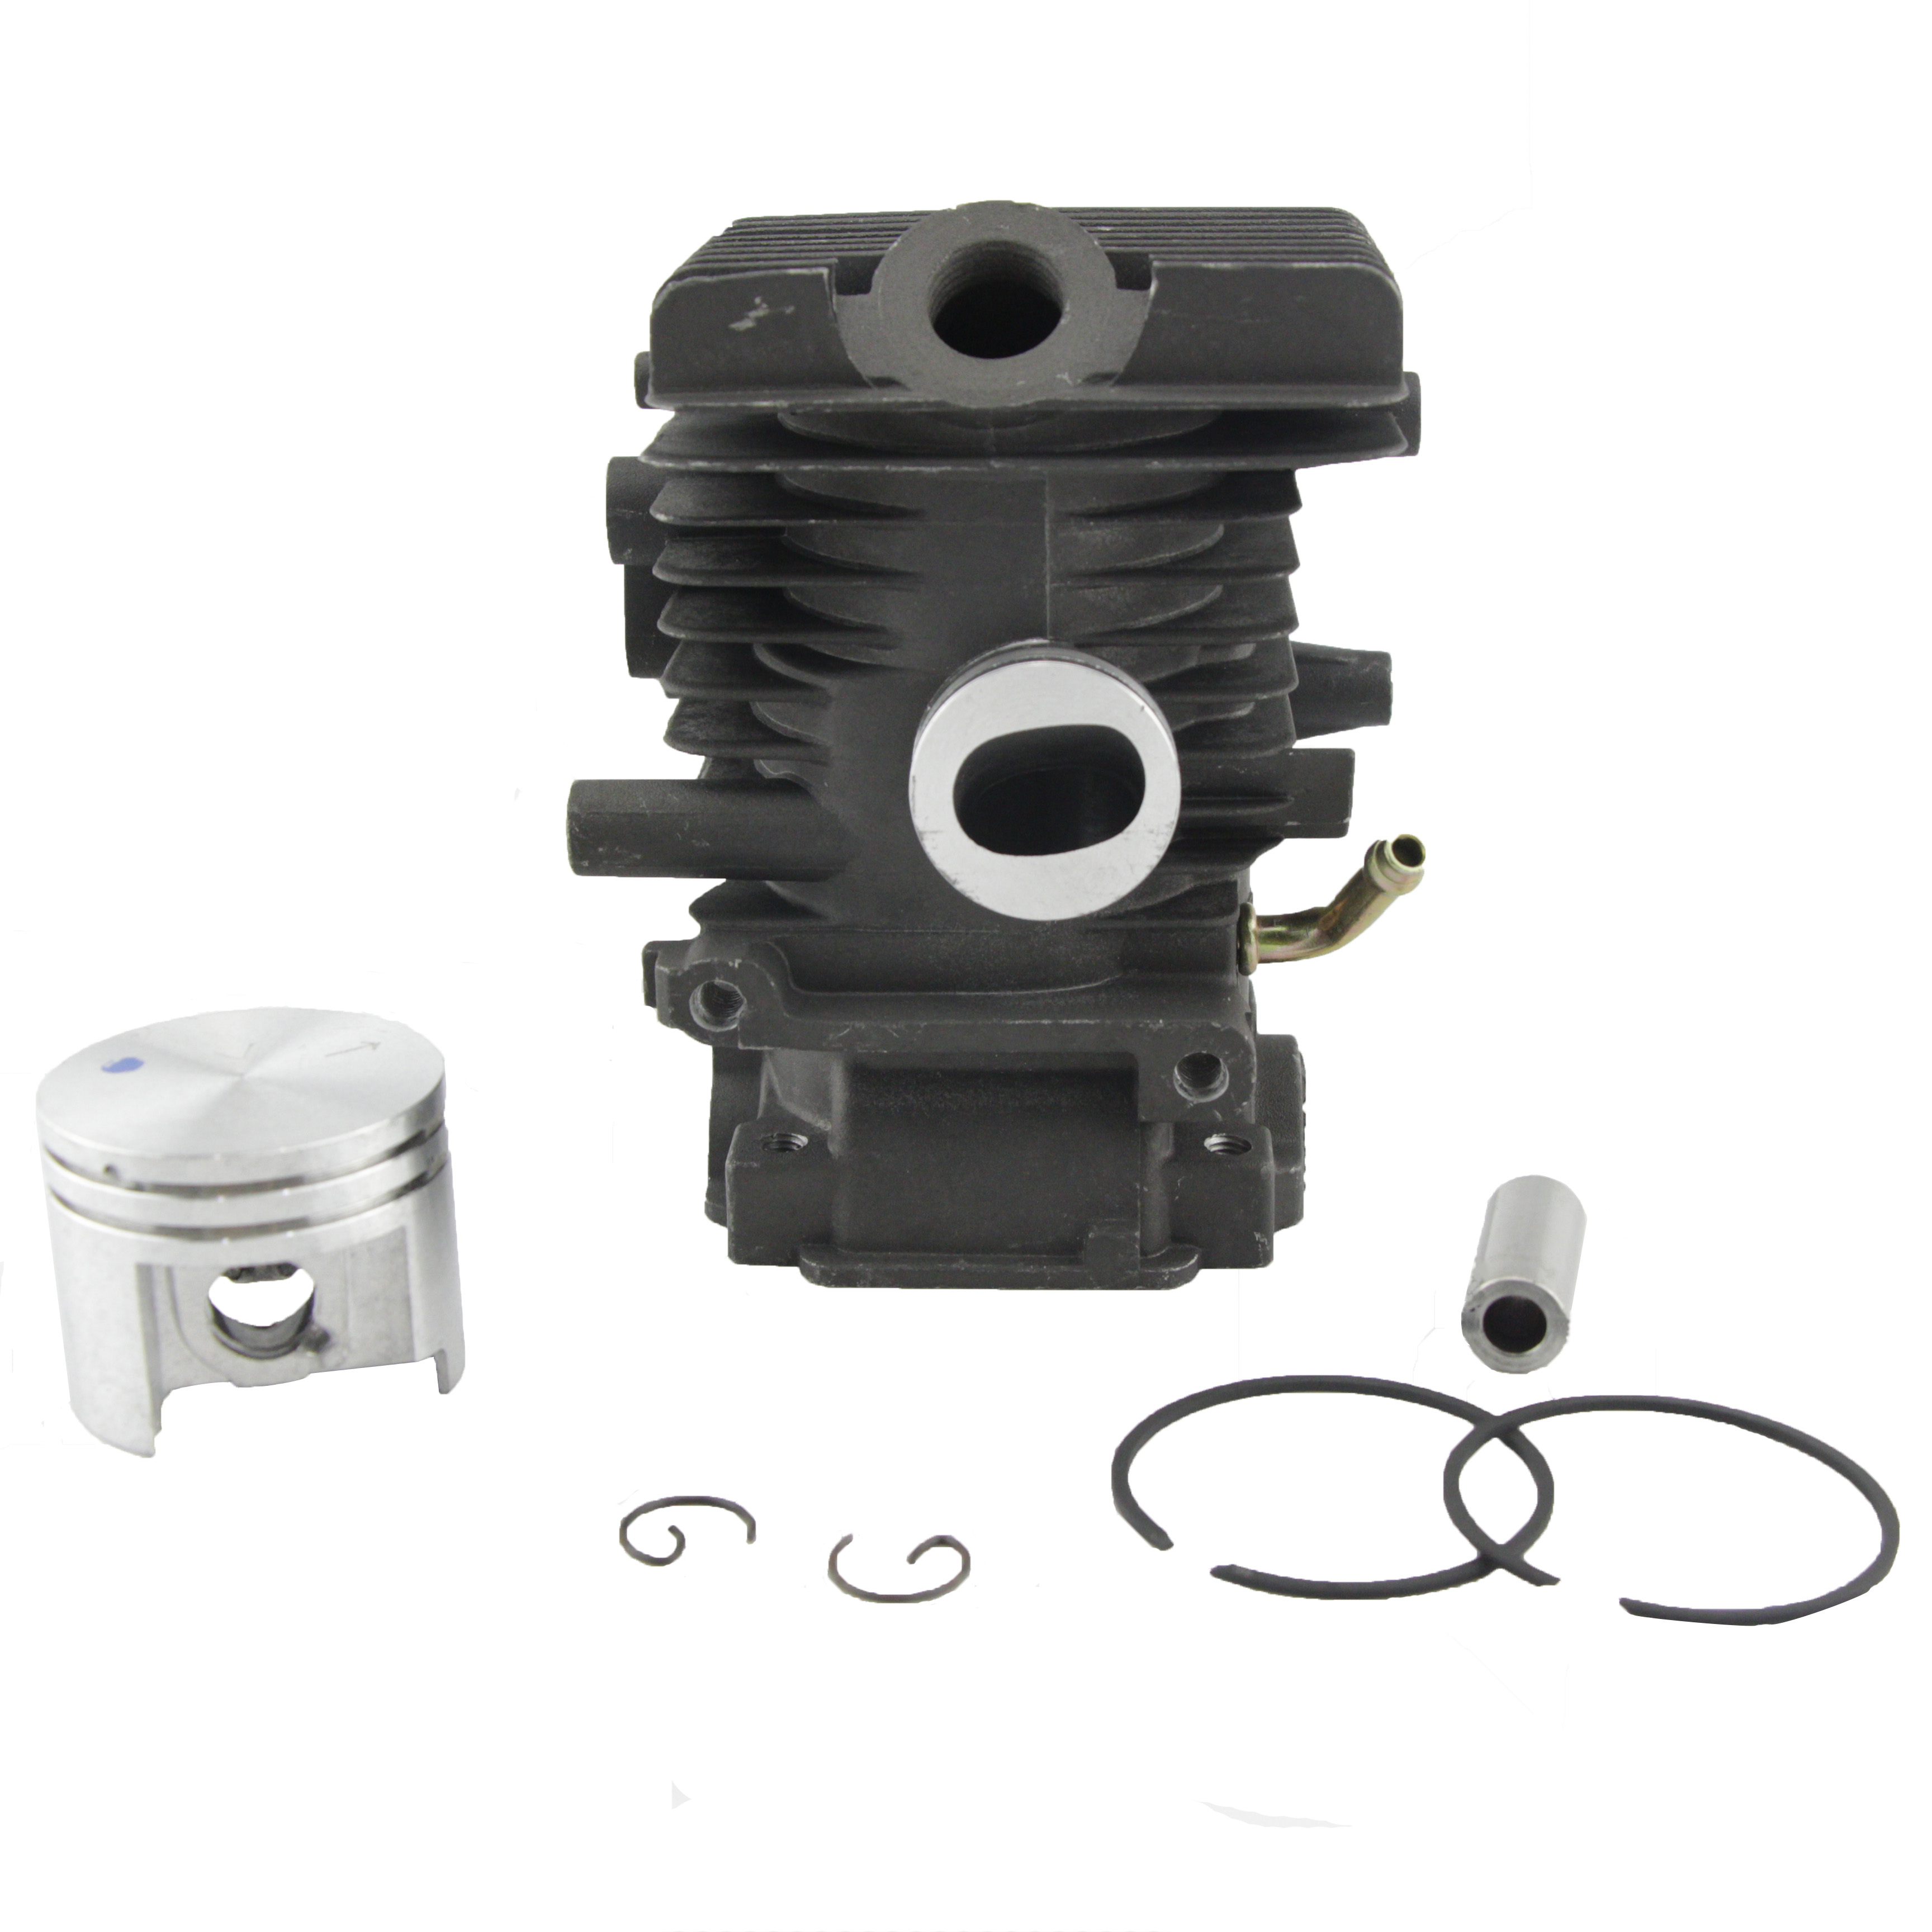 37MM Cylinder Piston Kit For Stihl Chainsaw MS192T MS192TC MS192T-Z 1137 020 1203, 1137 020 1201